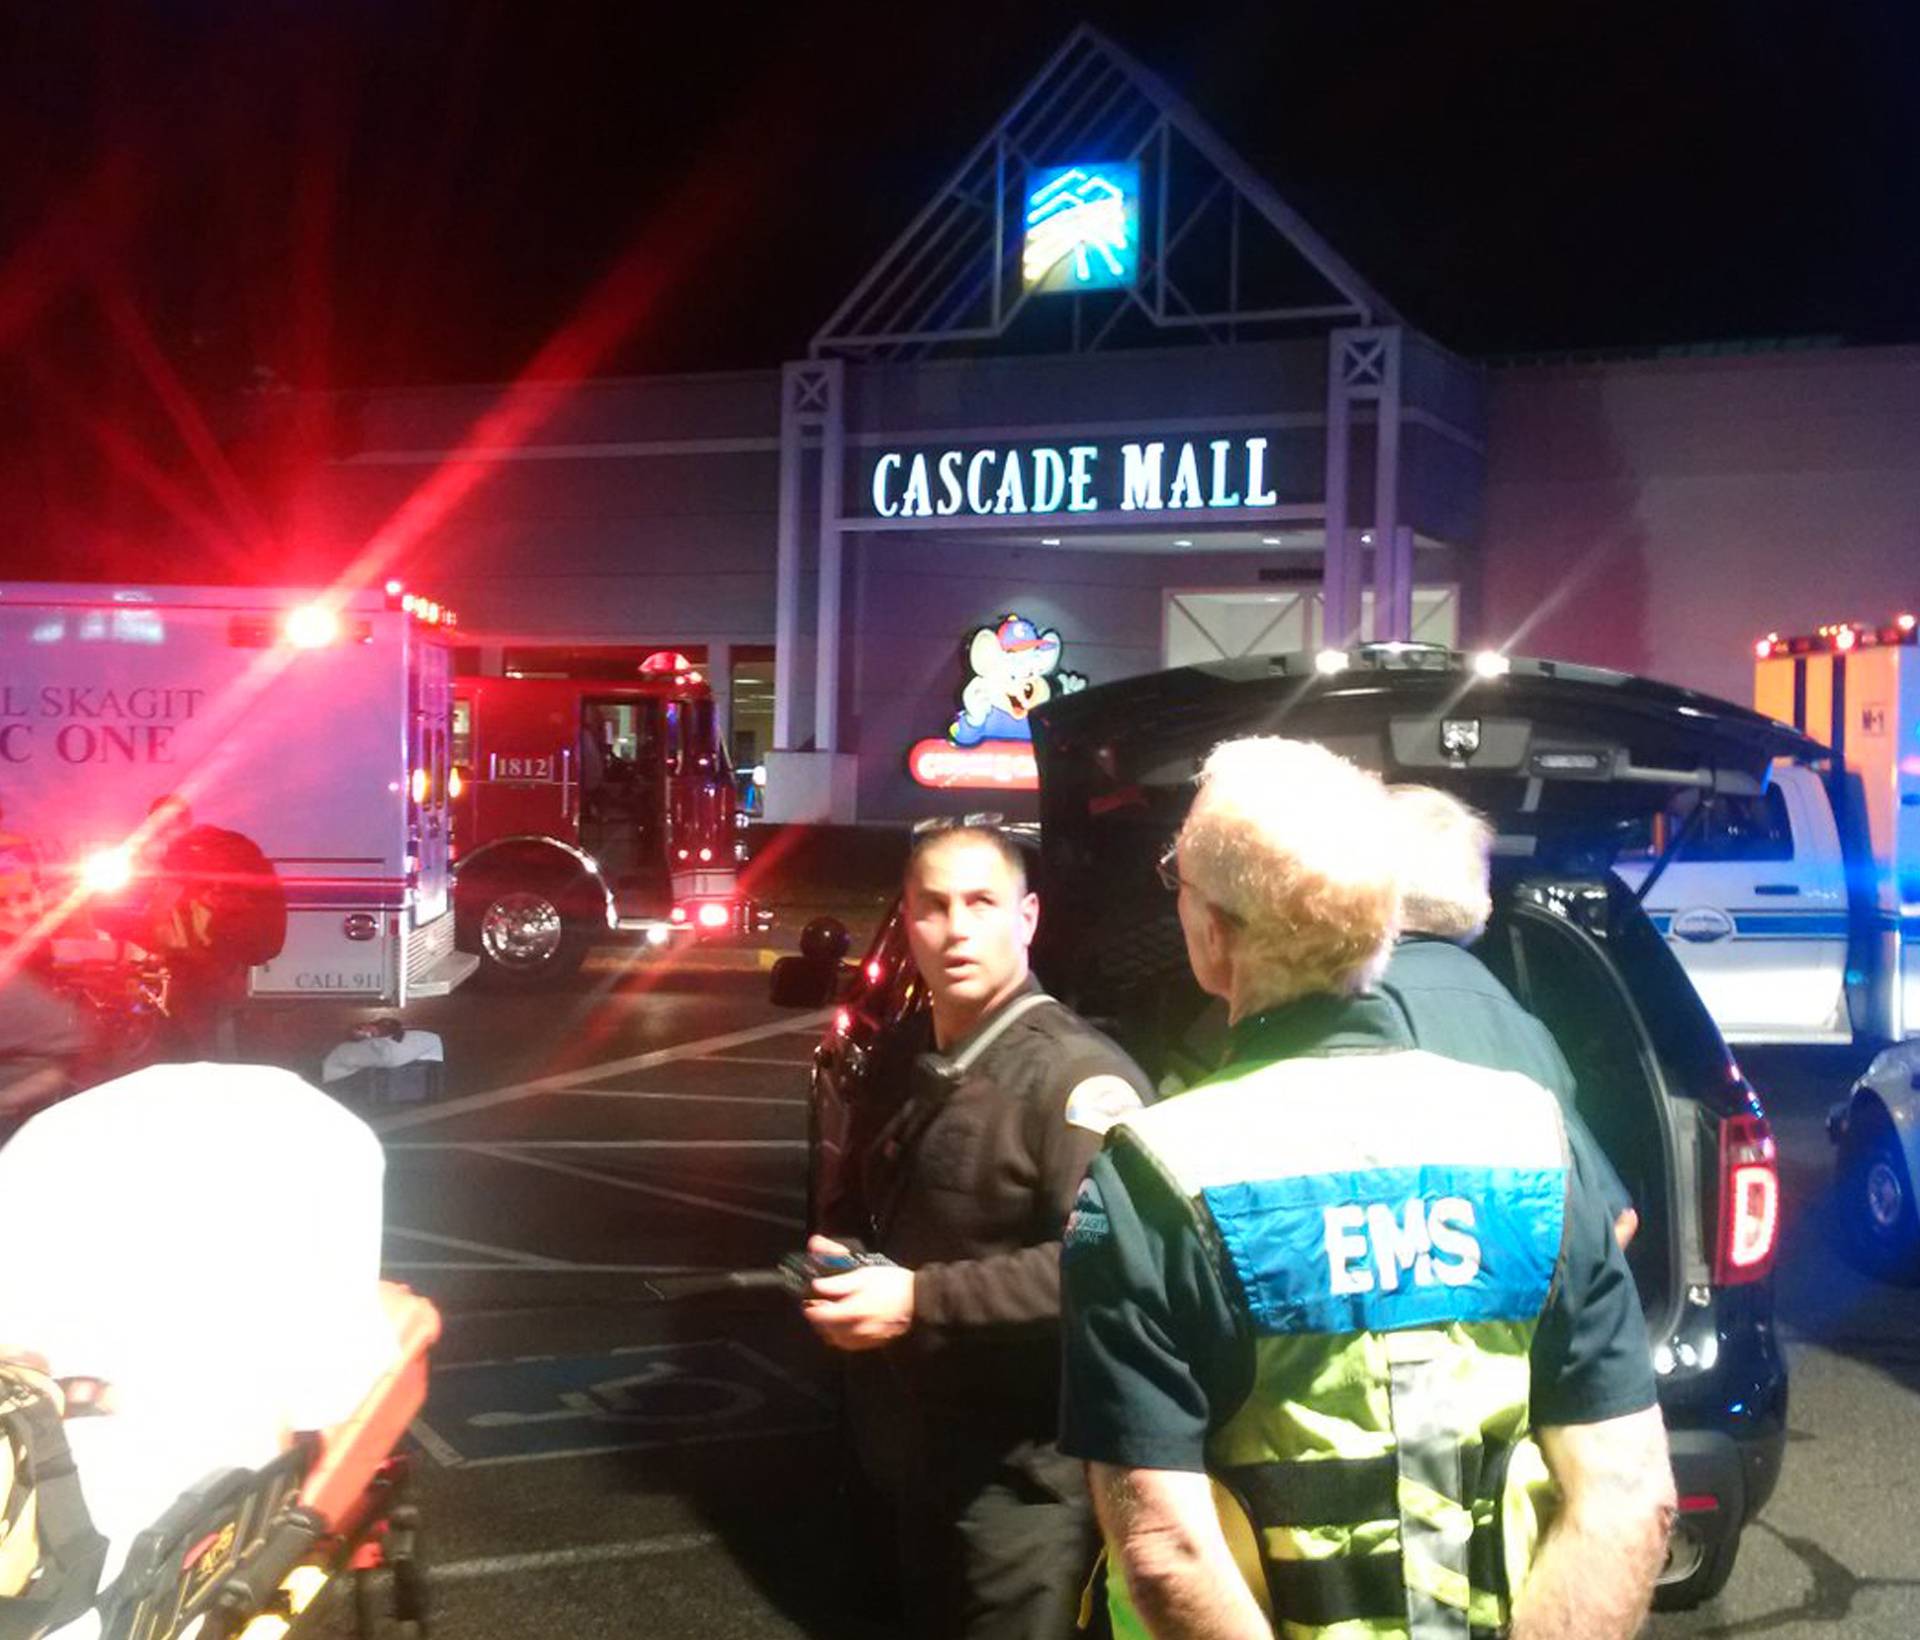 Medics wait to gain access to the Cascade Mall after four people were shot dead in Burlington